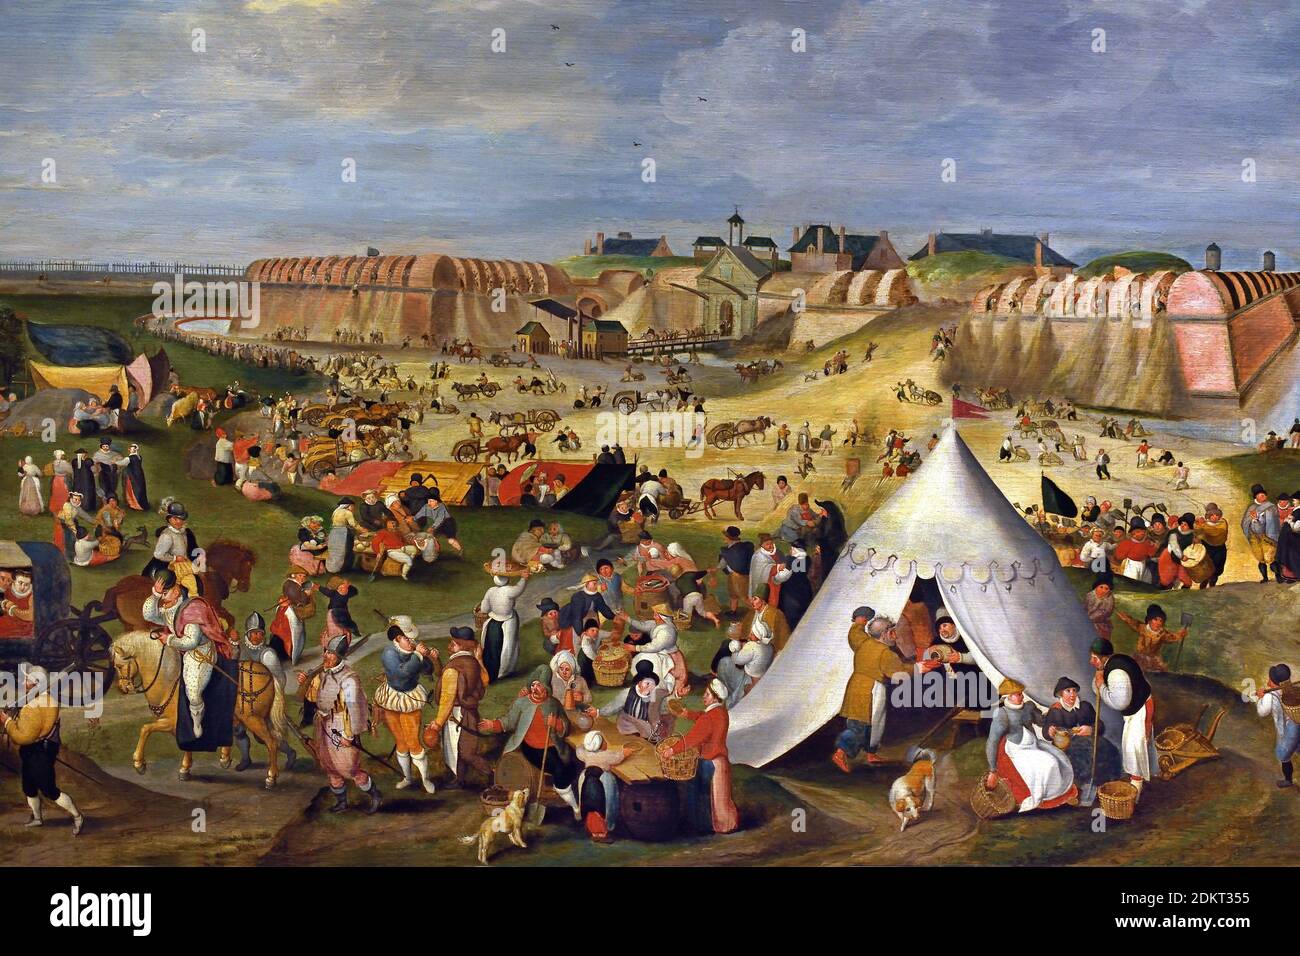 The demolition of the citadel of Antwerp in August 1577, Control the rebellious cities in the Netherlands, Duke of Alva the military manager Flips II building citadels or fortresses. The Antwerpers conquered the citadel of their city from the Spaniards in 1577. Pieter Balten. 1525 - 1598 after Maarten van Cleve 1527 - 1581 Flemish Renaissance painter Belgium Holland . The Dutch Revolt 1566–1648  Low Countries against the rule of the Habsburg King Philip II of Spain Eighty Years, War, Spanish, Dutch, Netherlands,  Eighty Years' War, (1568–1648), war of  Netherlands  independence from Spain, Stock Photo